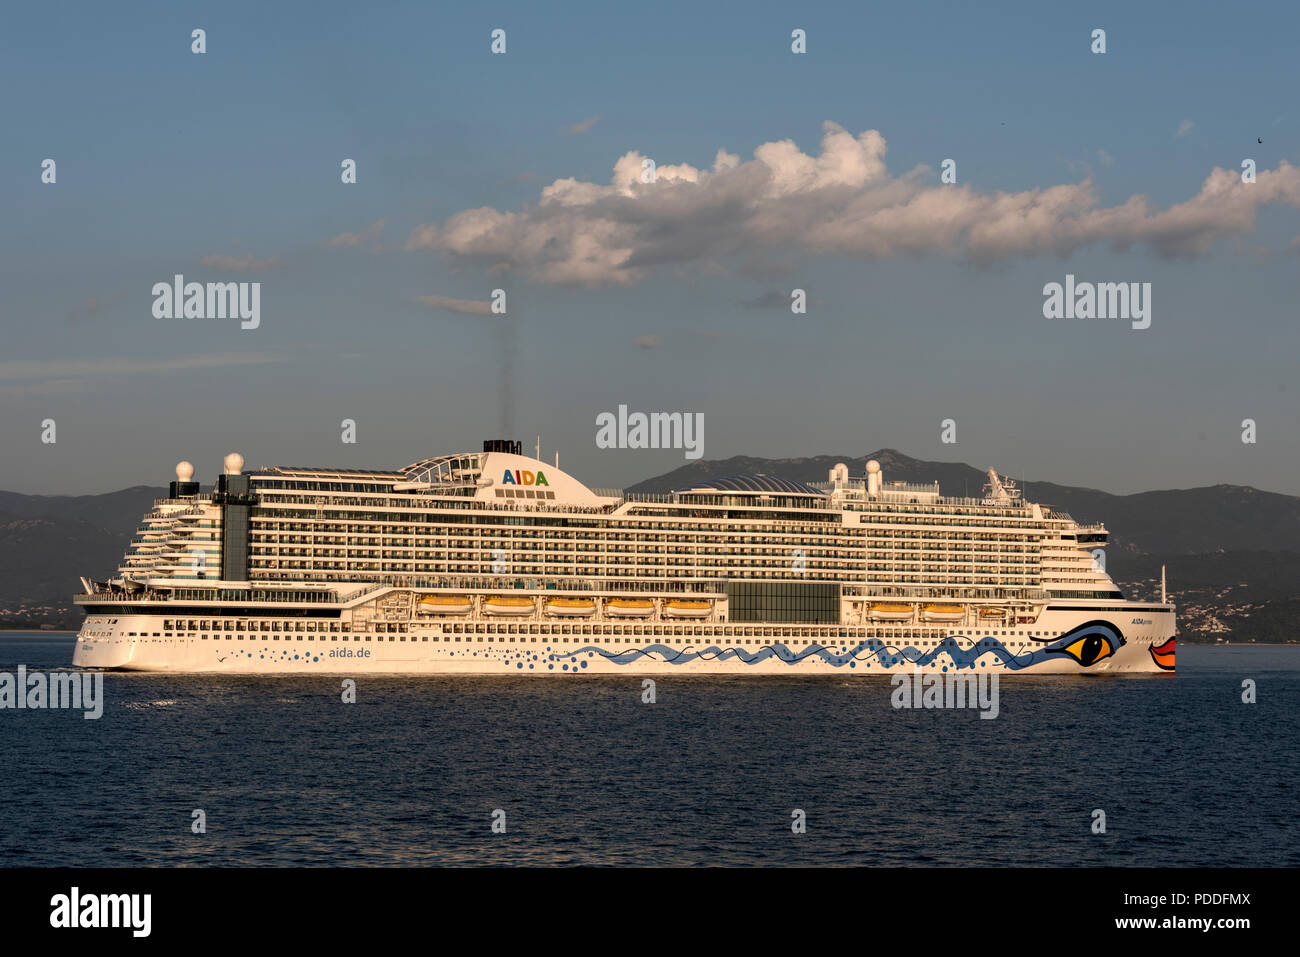 The AIDA prima cruise ship built by Mitsubishi Heavy Industries (MHI)in Japan for the German cruise operator AIDA Cruises leaves Ajaccio port in Ajacc Stock Photo